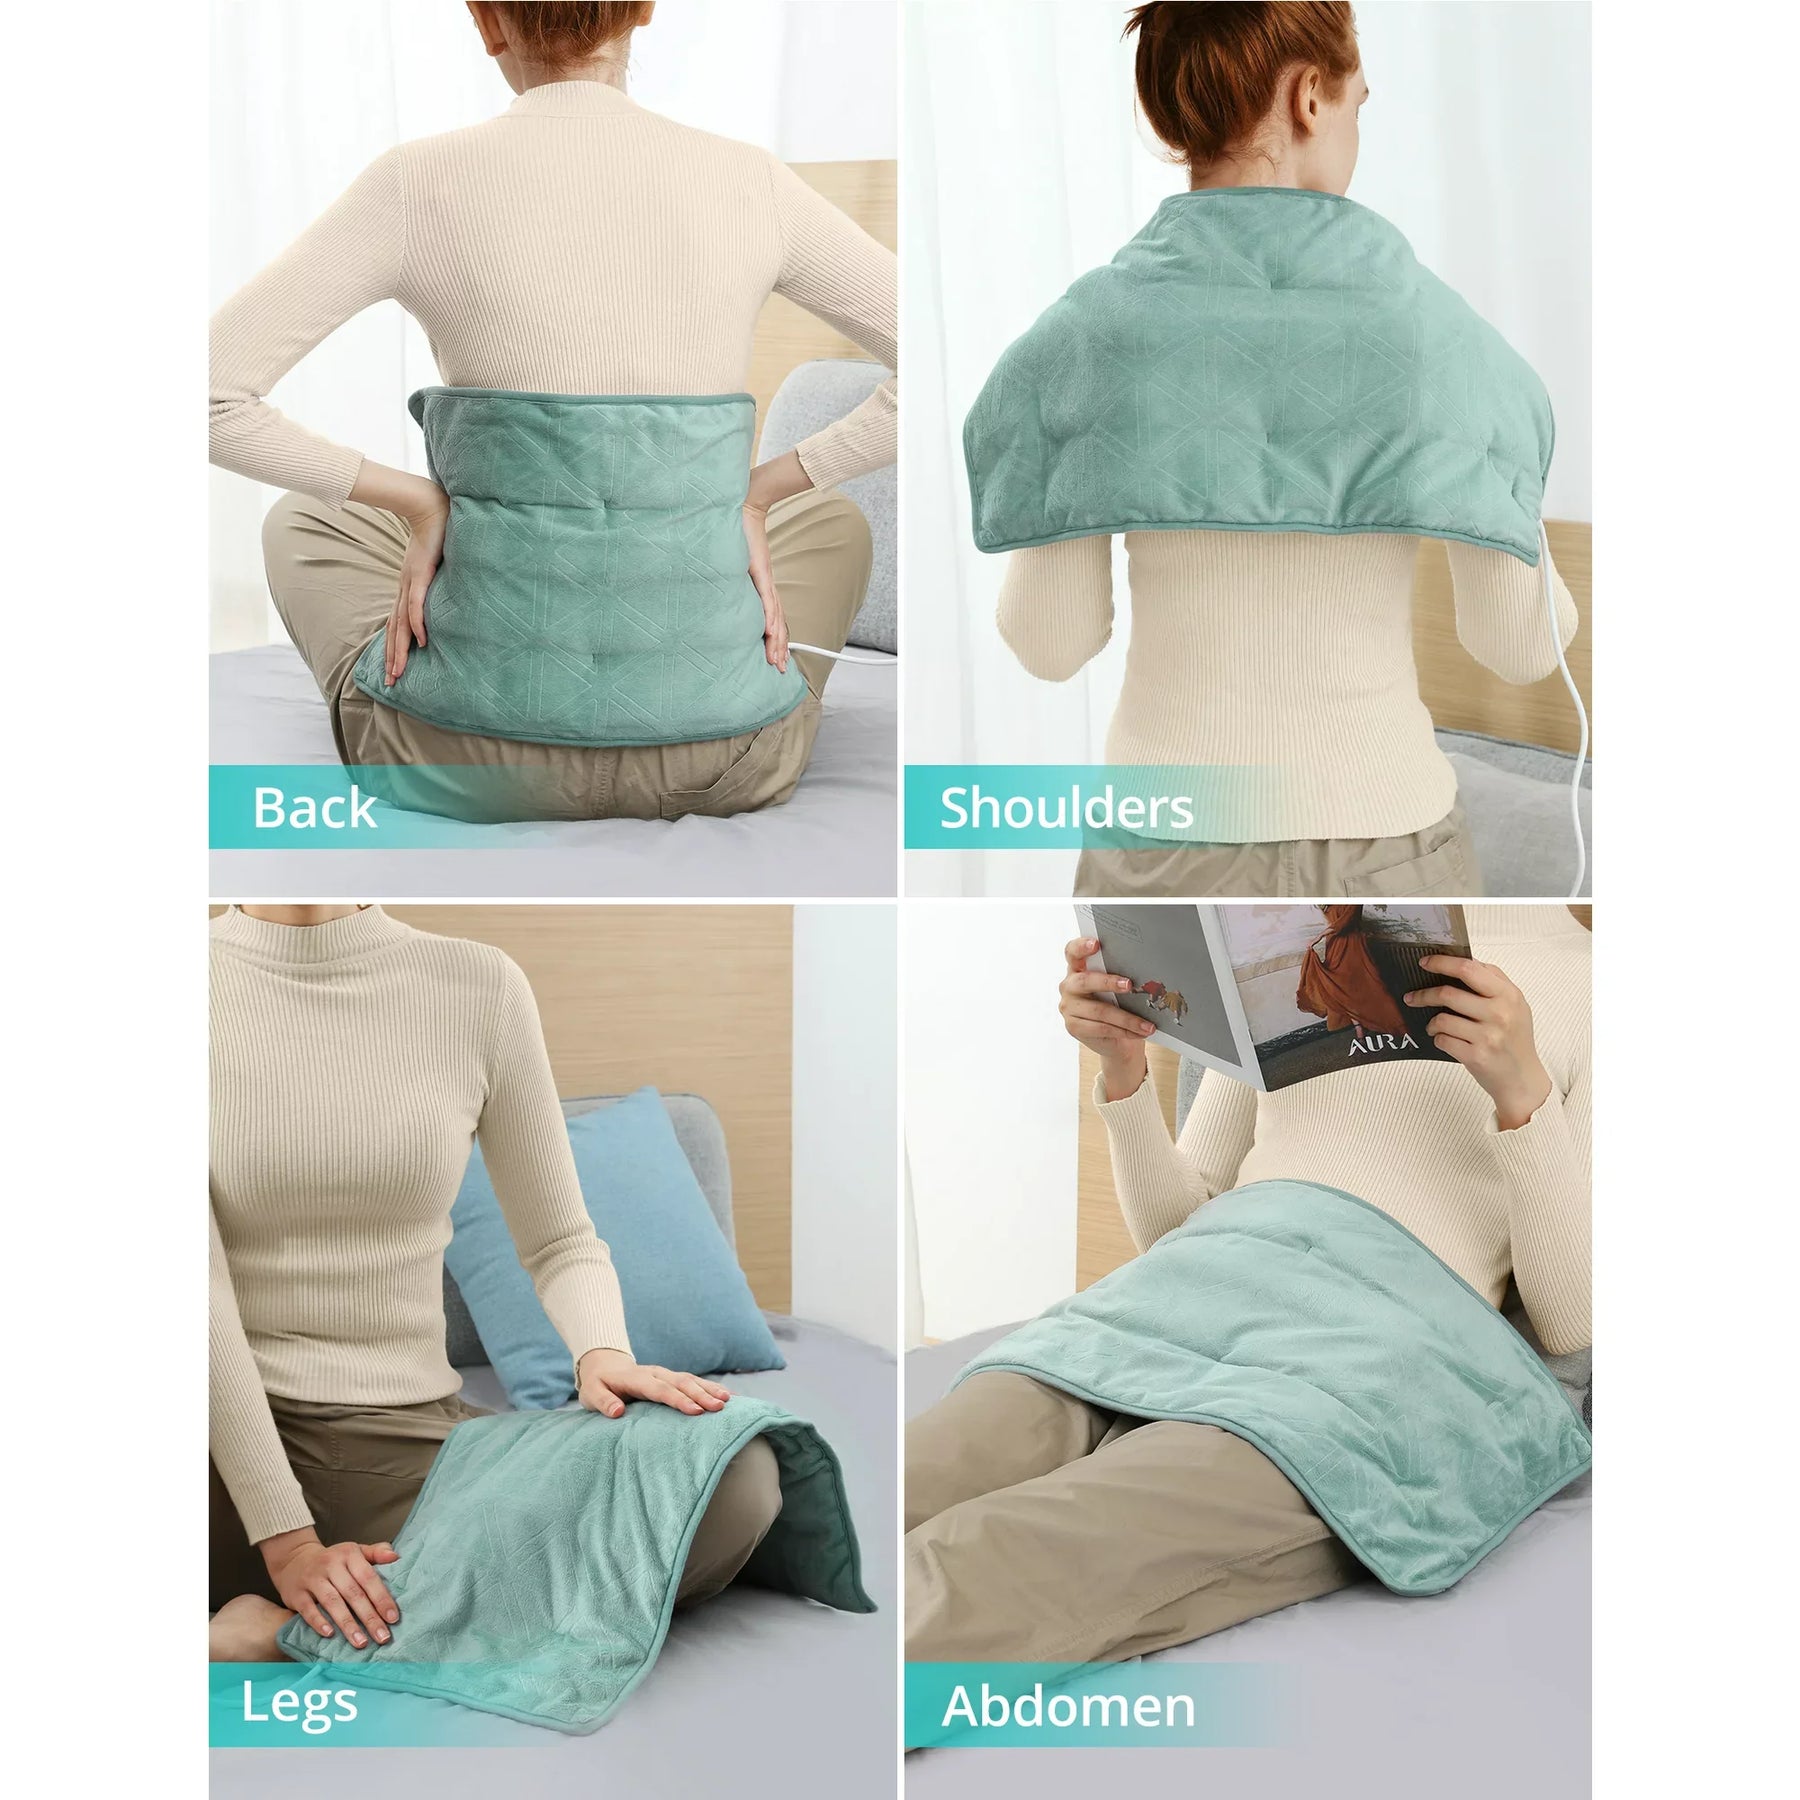 Evajoy Heating Pad for Back Pain Relief, 24 x 29.5 Extra-Large Elect